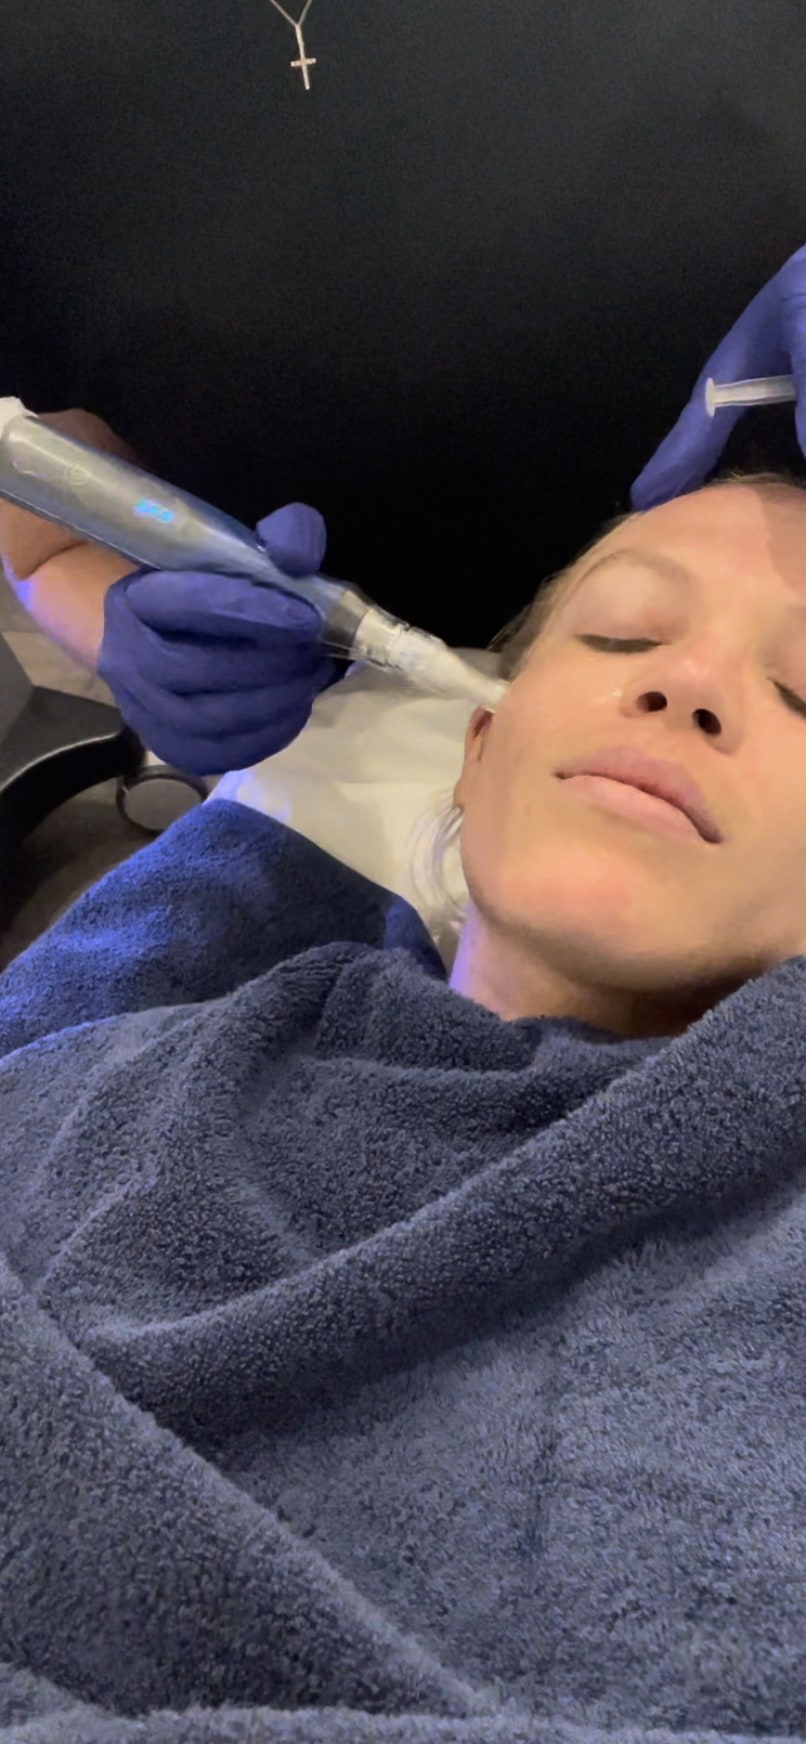 The esthetician held the microneedling pen in her left hand and the 'vitamin cocktail' injection in her left